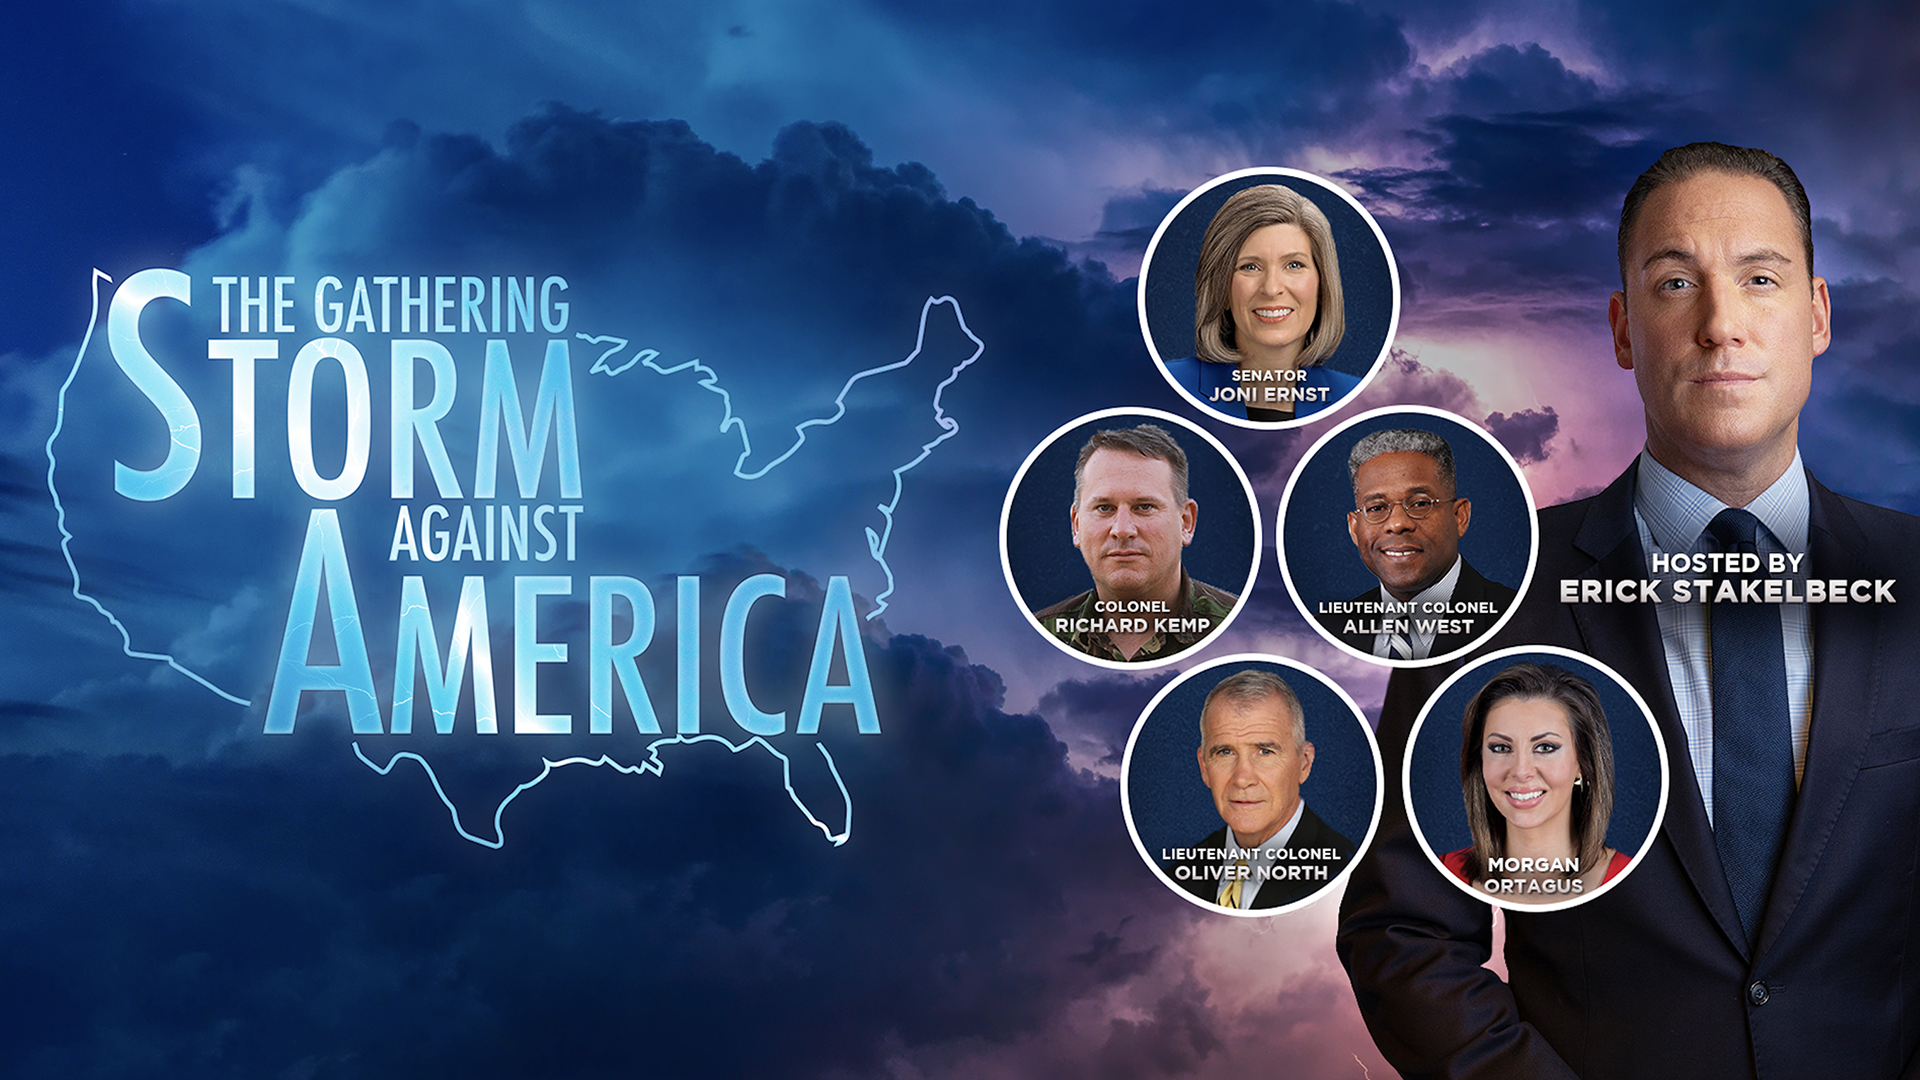 The Gathering Storm Against America with Erick Stakelbeck